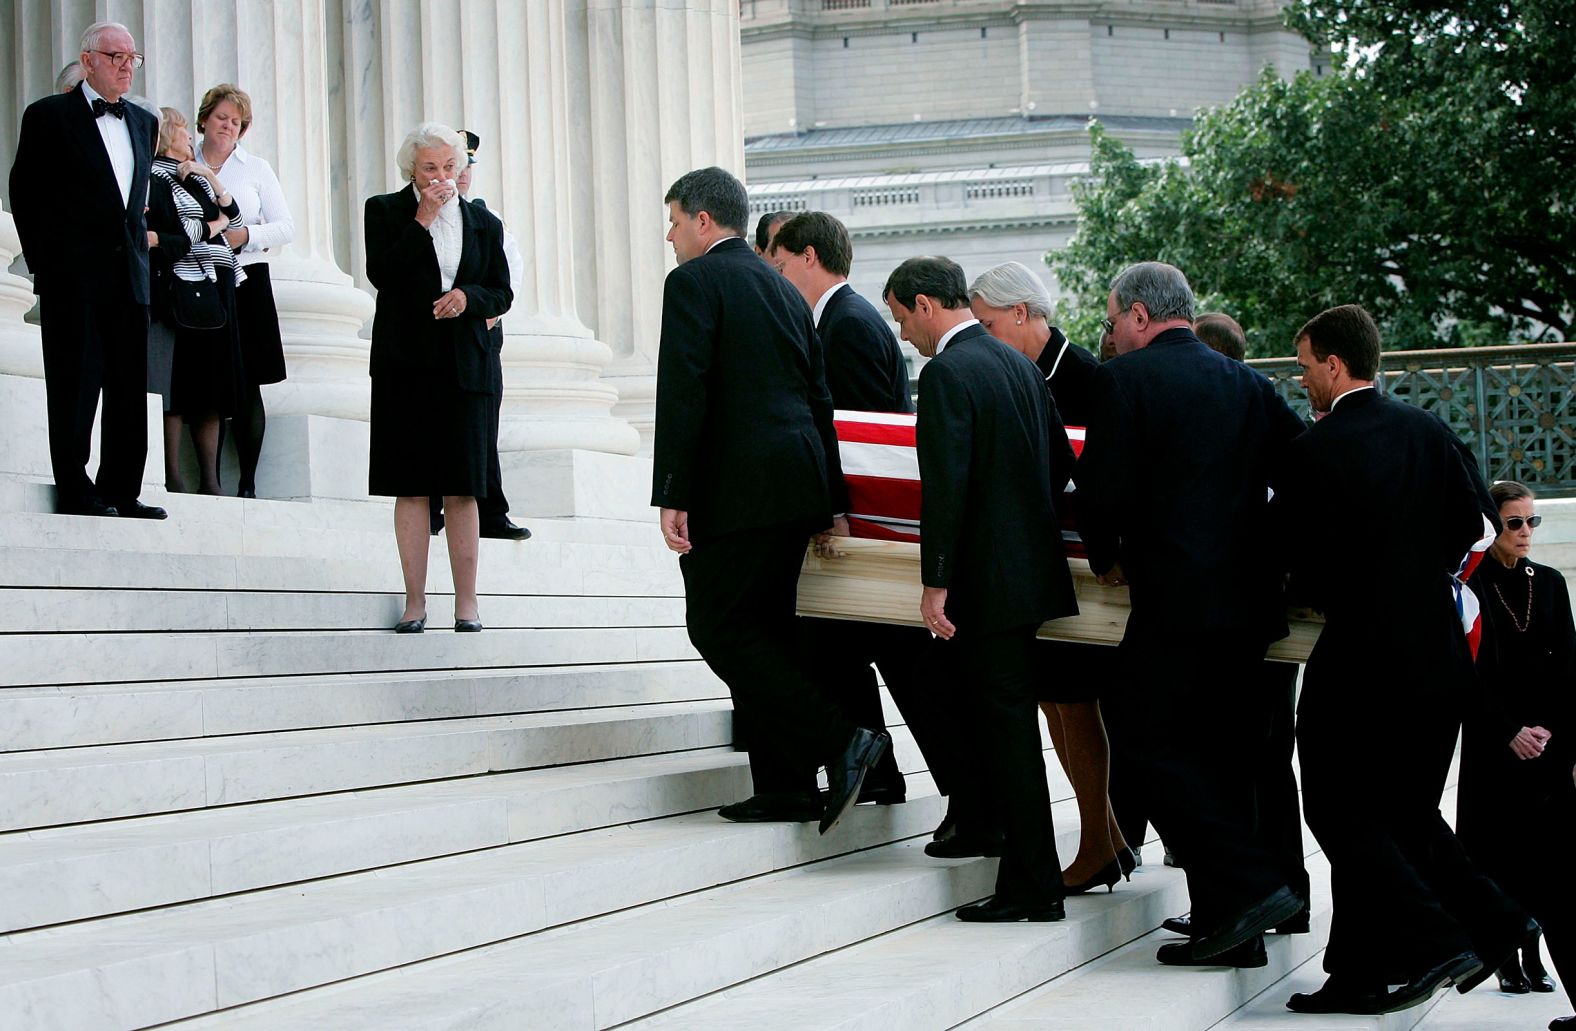 O'Connor weeps as pallbearers carry the casket of former Chief Justice William Rehnquist in 2005. Rehnquist was her classmate at Stanford Law School, and the two once dated.